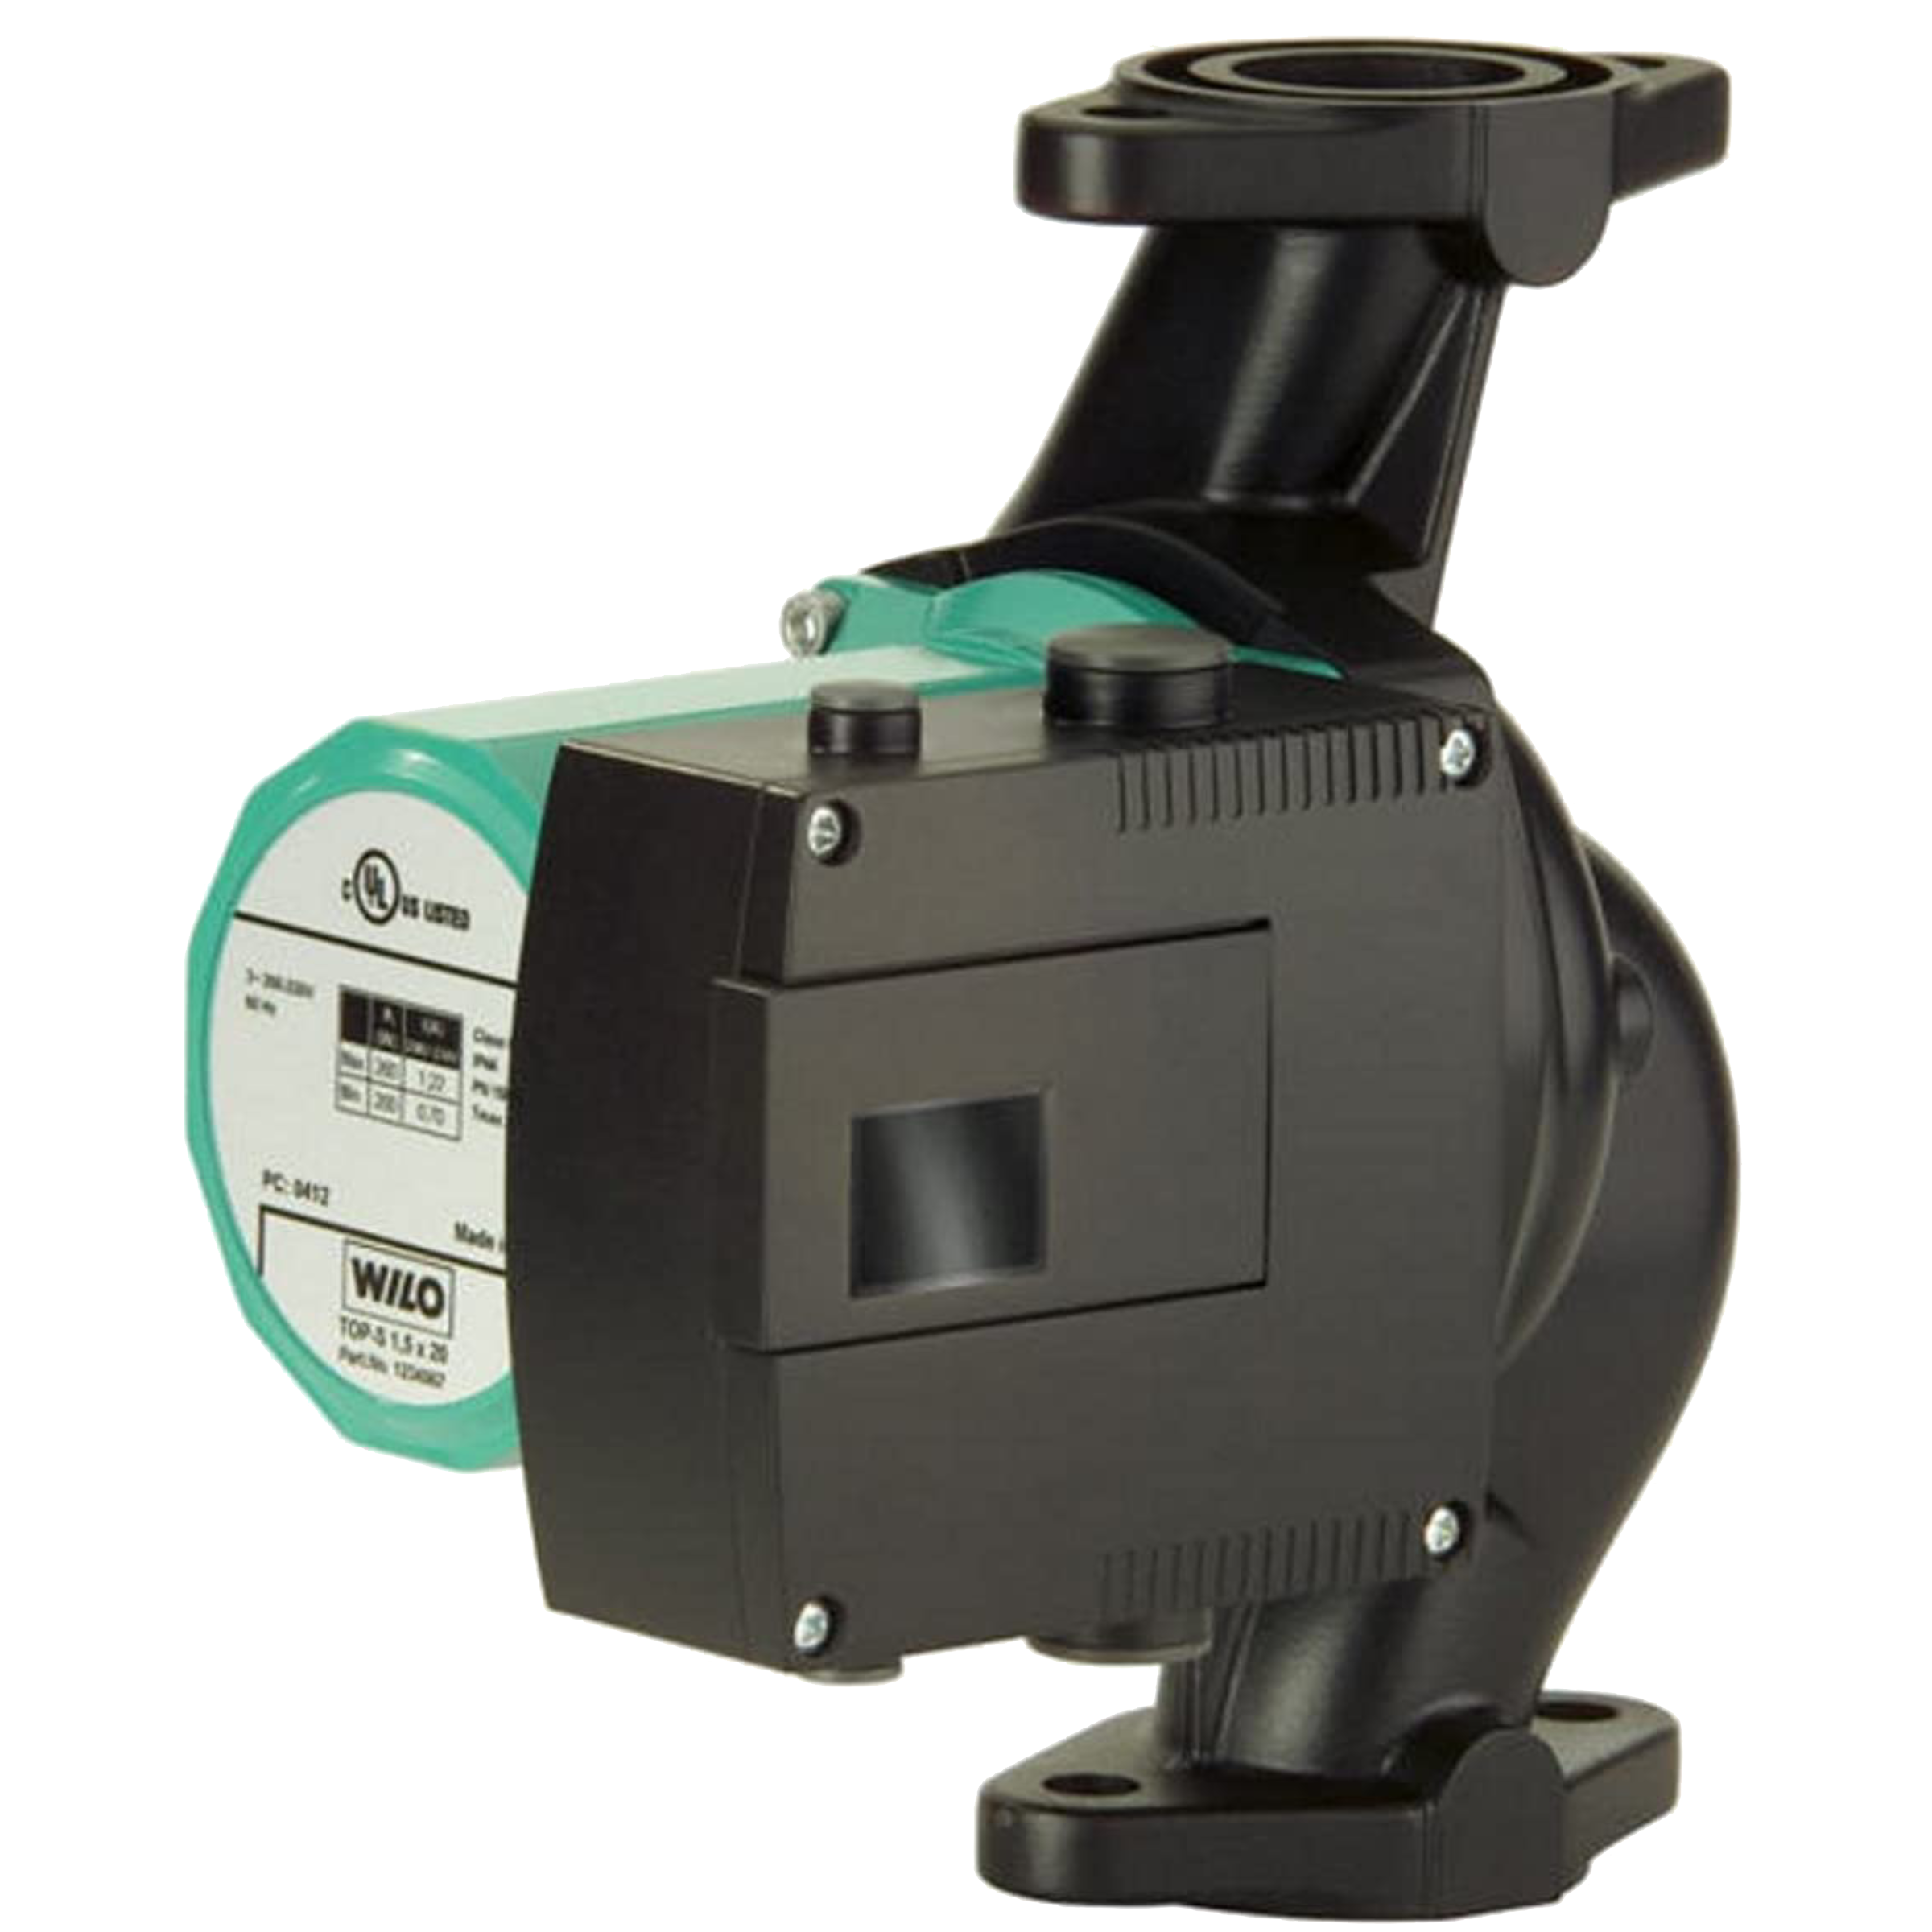 Top S 1.5 x 20 Wilo Top S Series 2-Speed Residential Circulating Pump, 1/4 HP, 145 Psi, Max Flow 70 USGPM, 115V/60Hz/1Ph